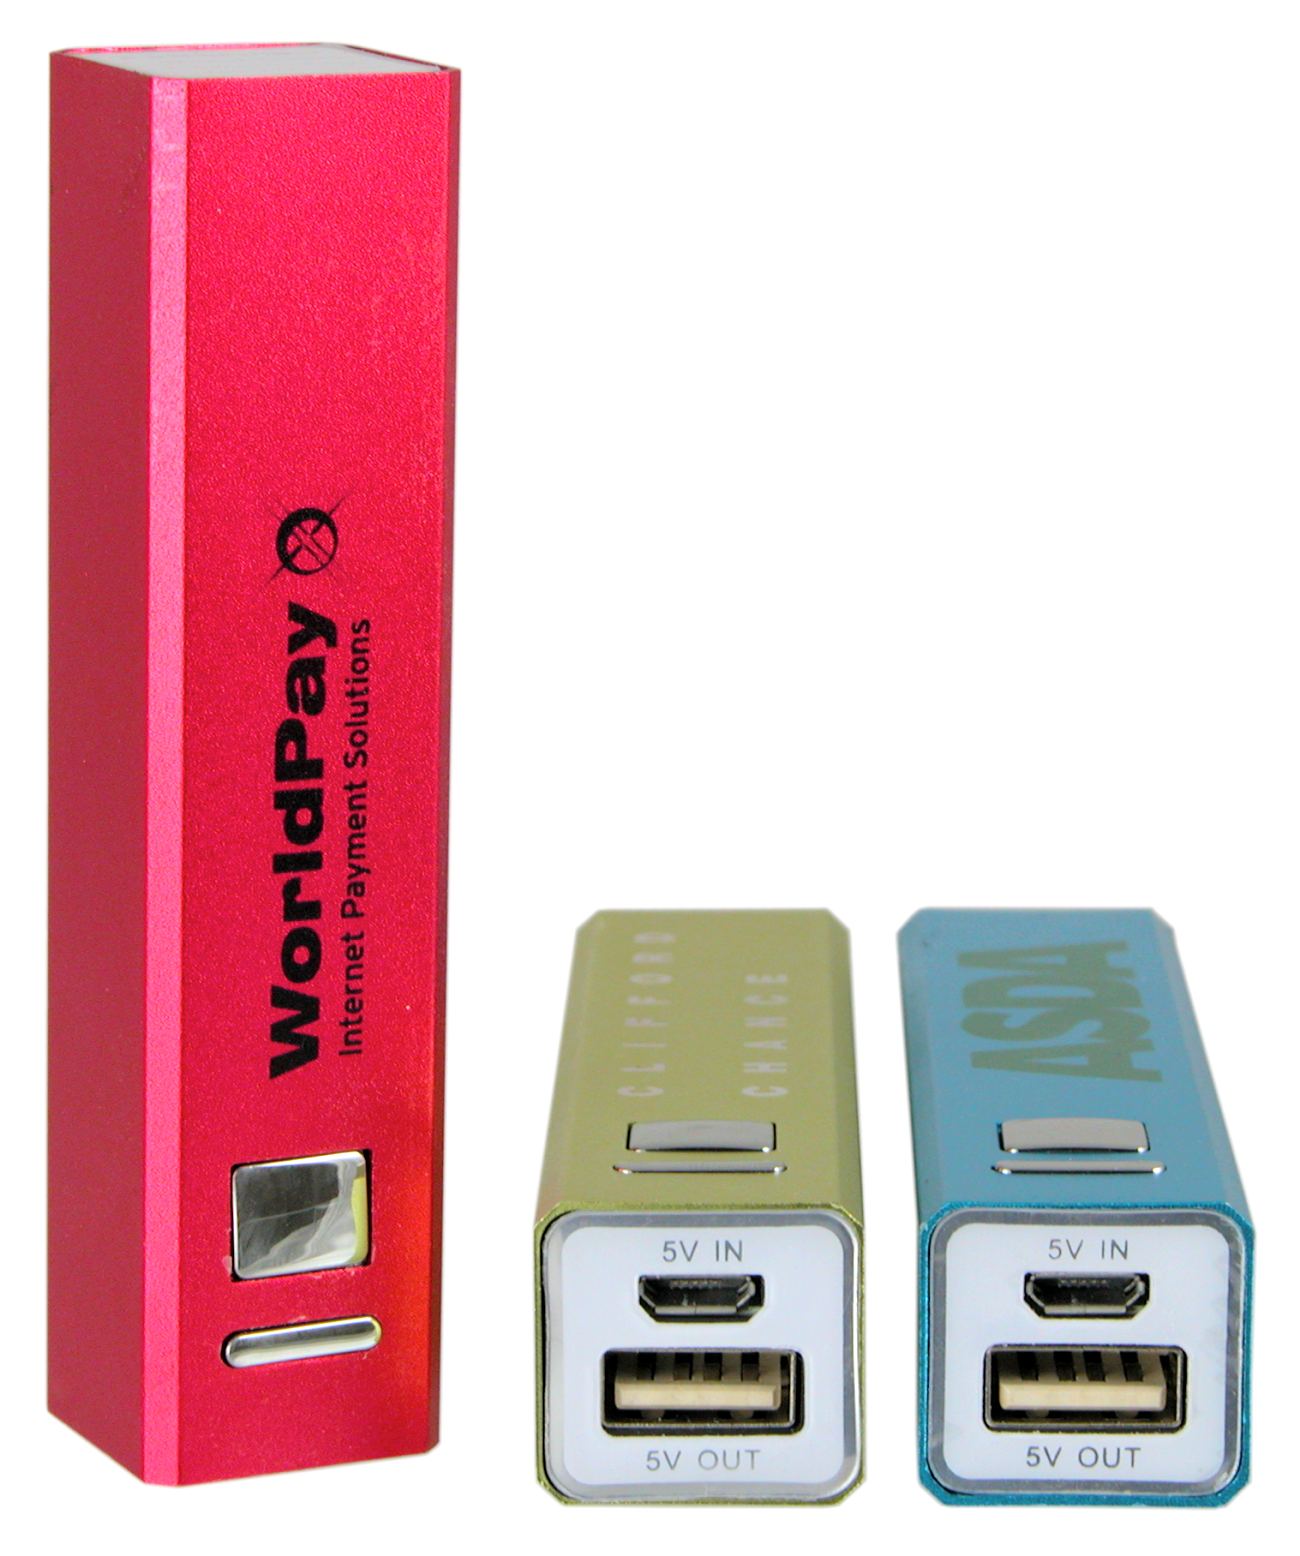 Three power bank chargers with a rectangular metal case.